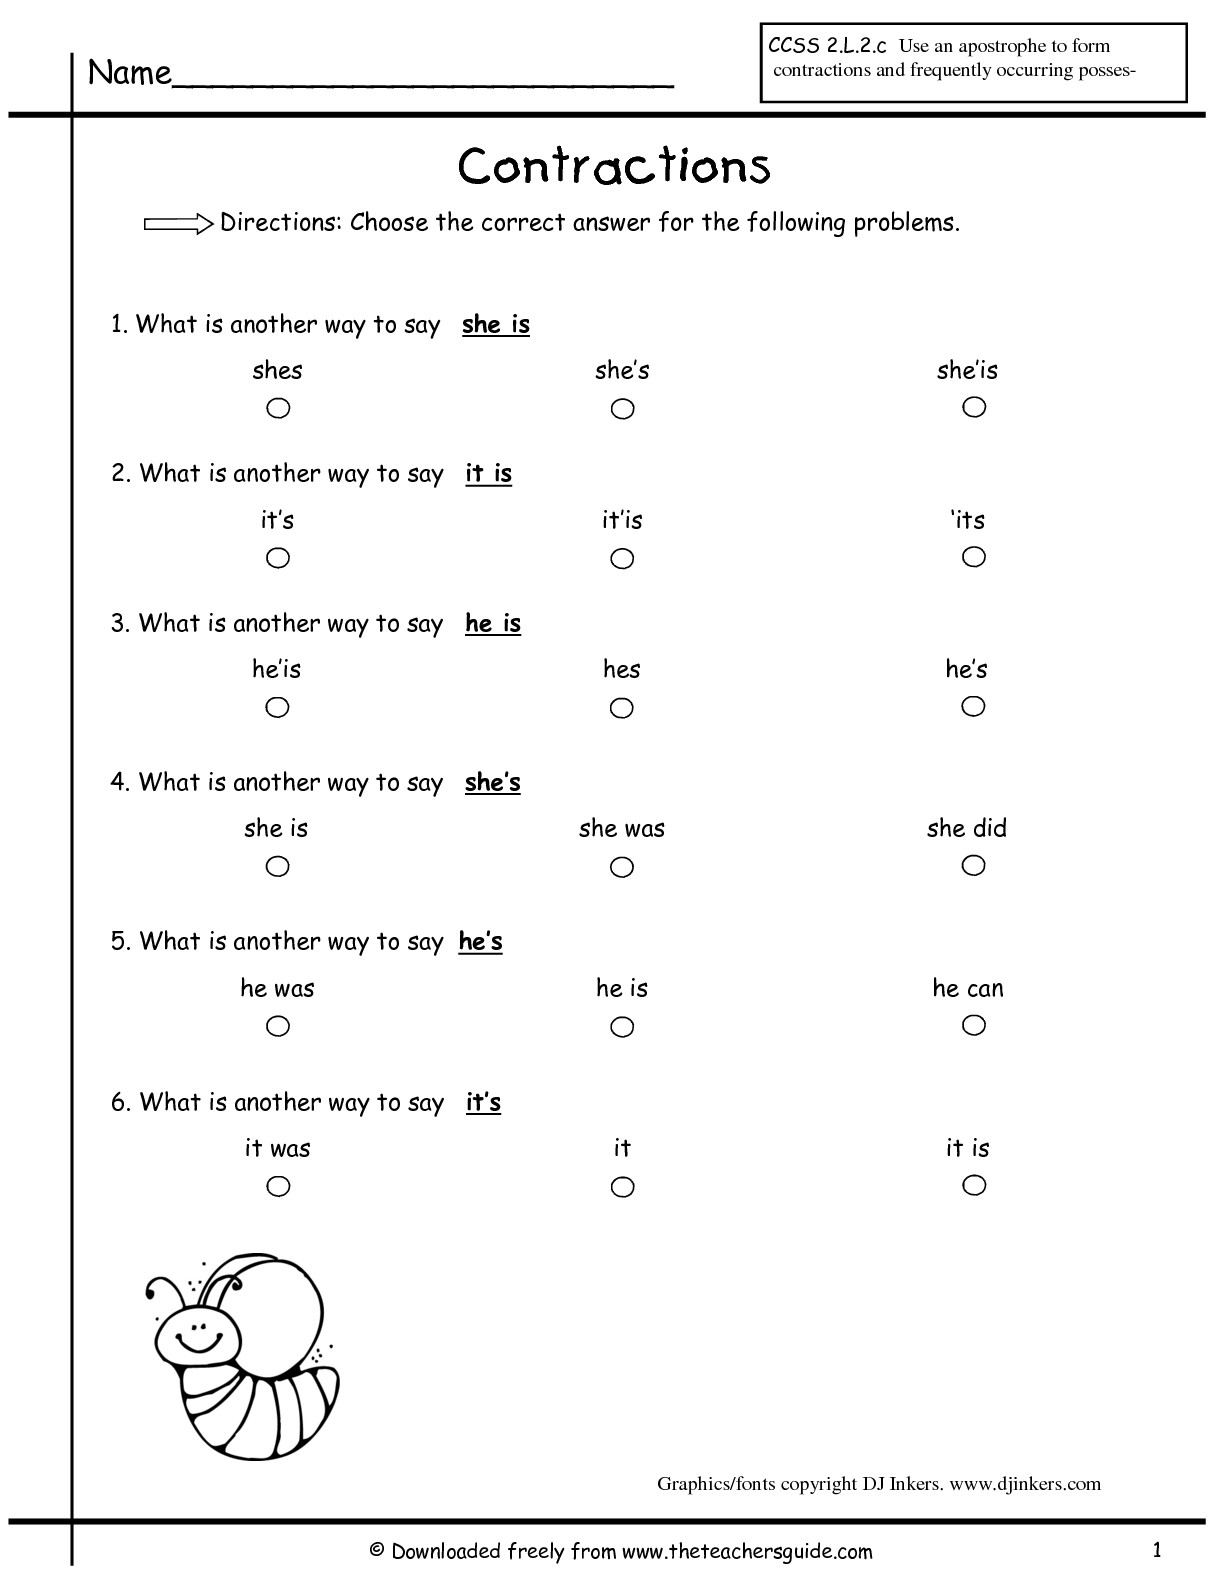 Contraction Worksheets 1st Grade Image